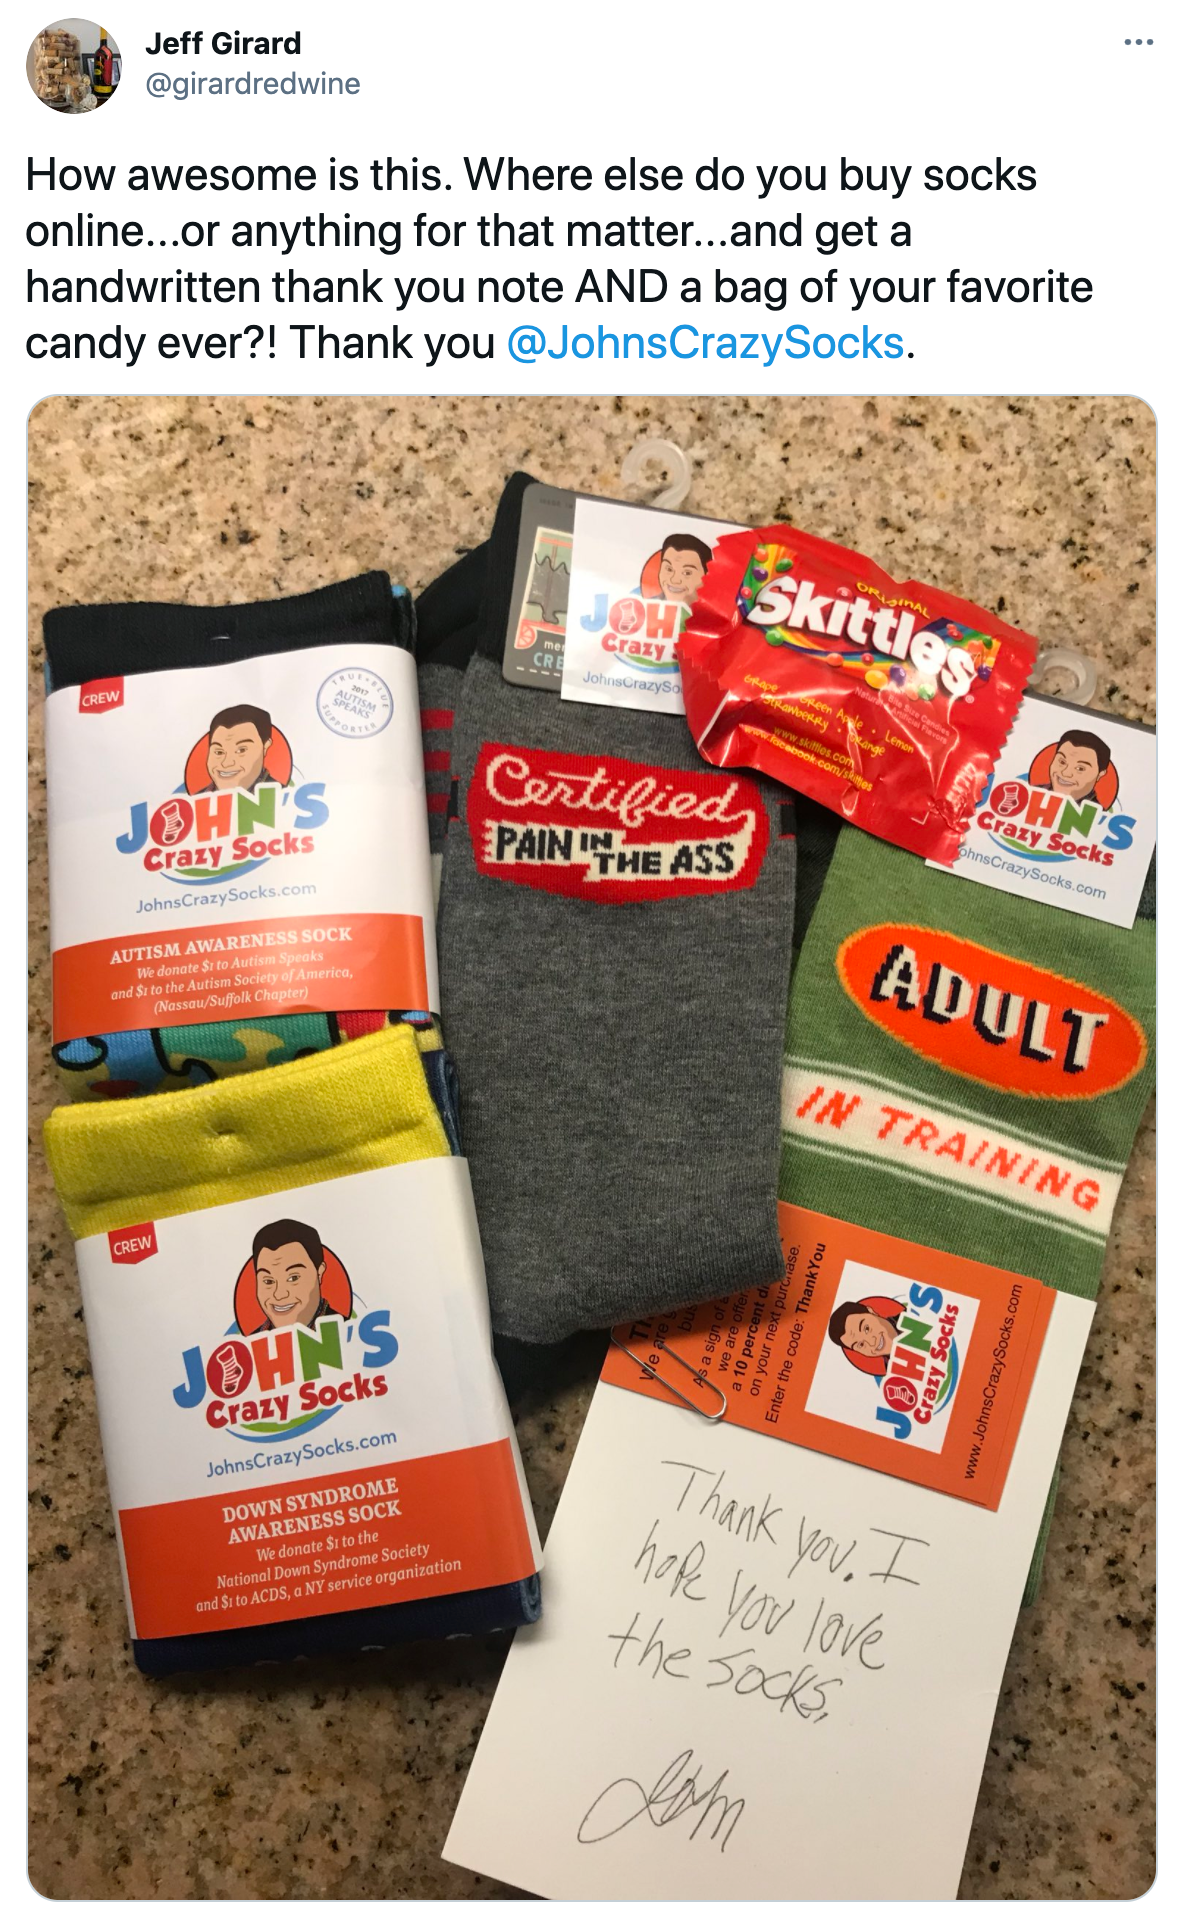 twitter post by johns crazy socks customer showing how it thanked them for their purchase with written note